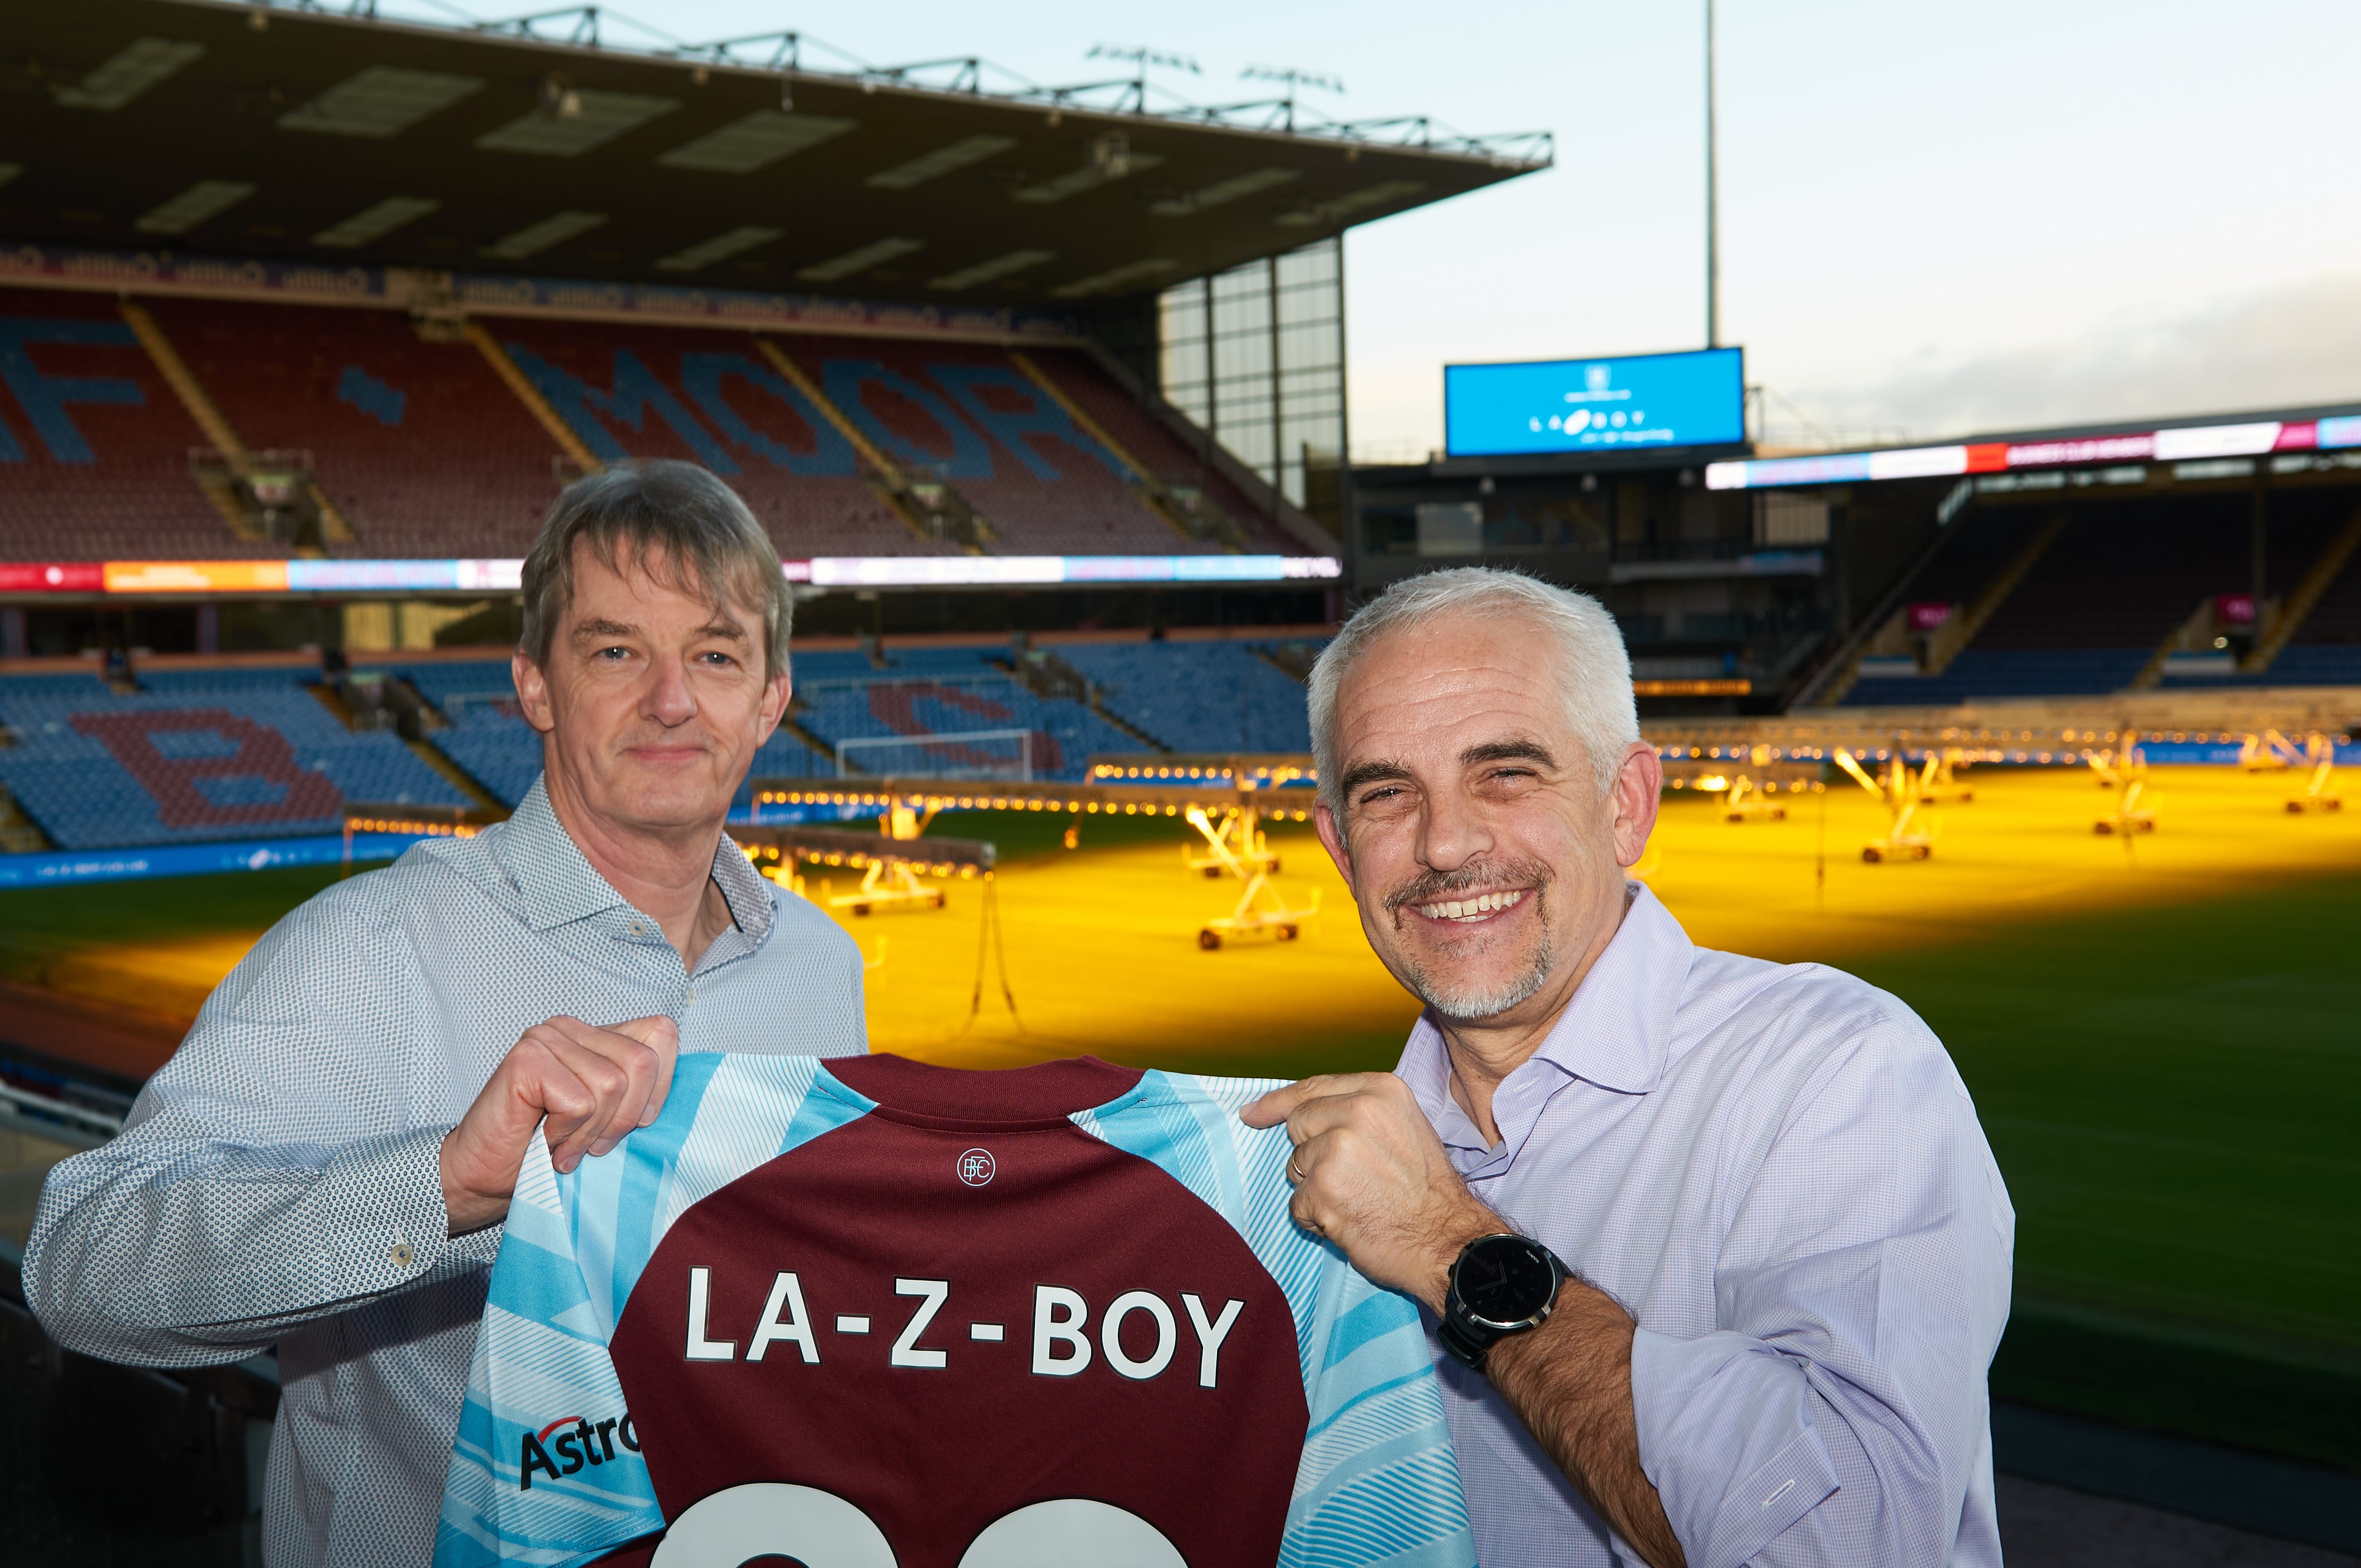 image for La-Z-Boy UK becomes latest Business Club Plus members at Turf Moor post